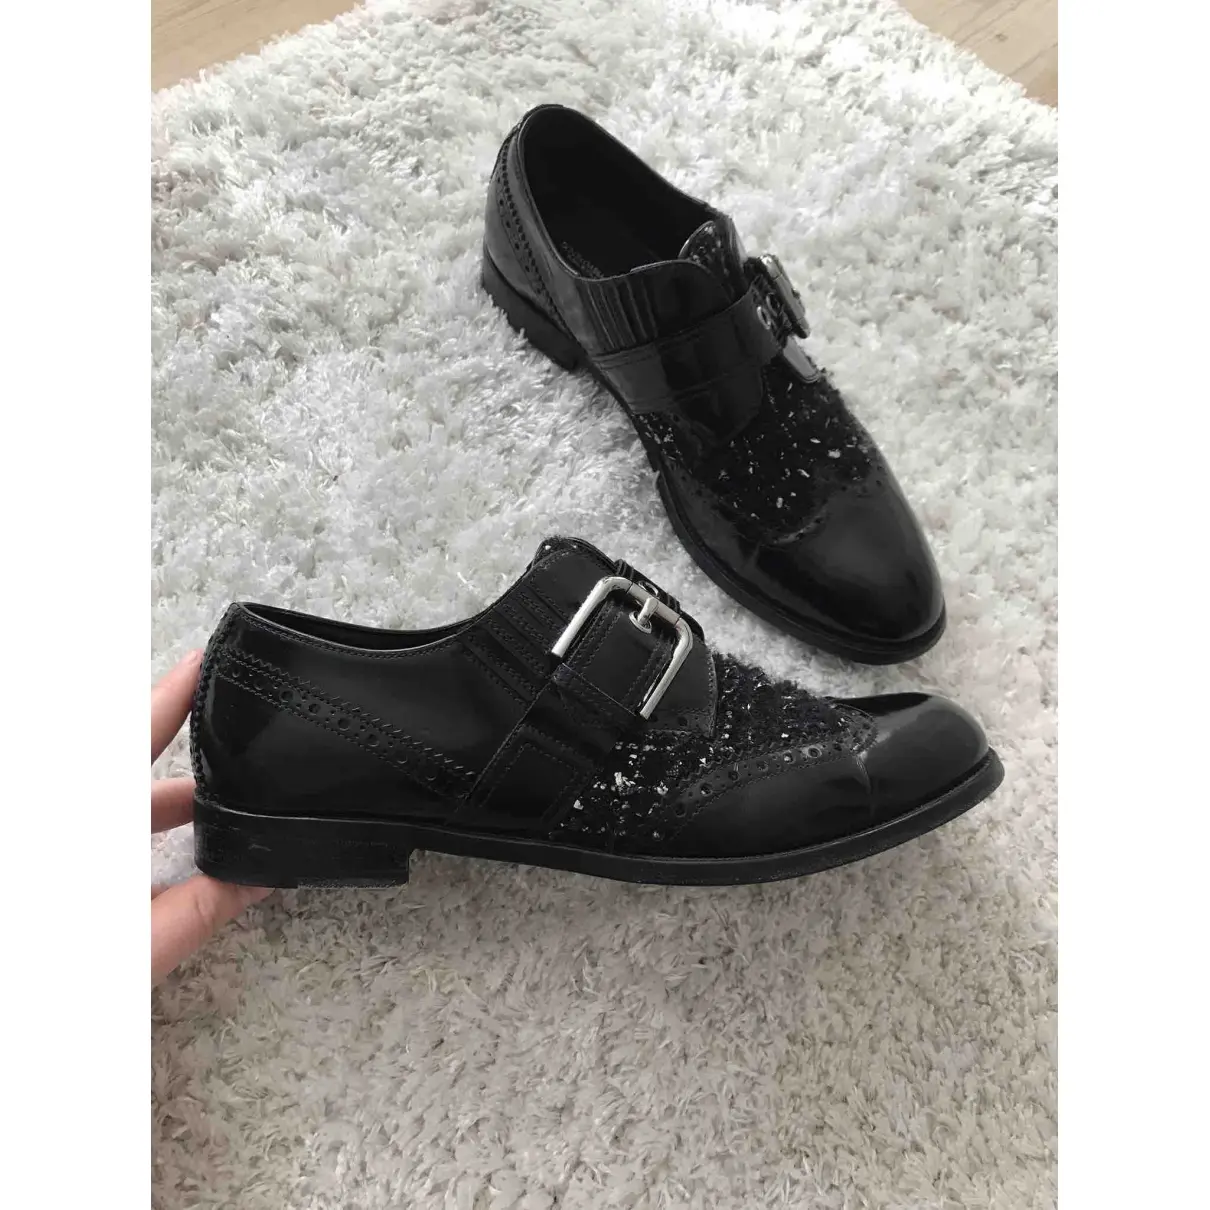 Dolce & Gabbana Patent leather flats for sale